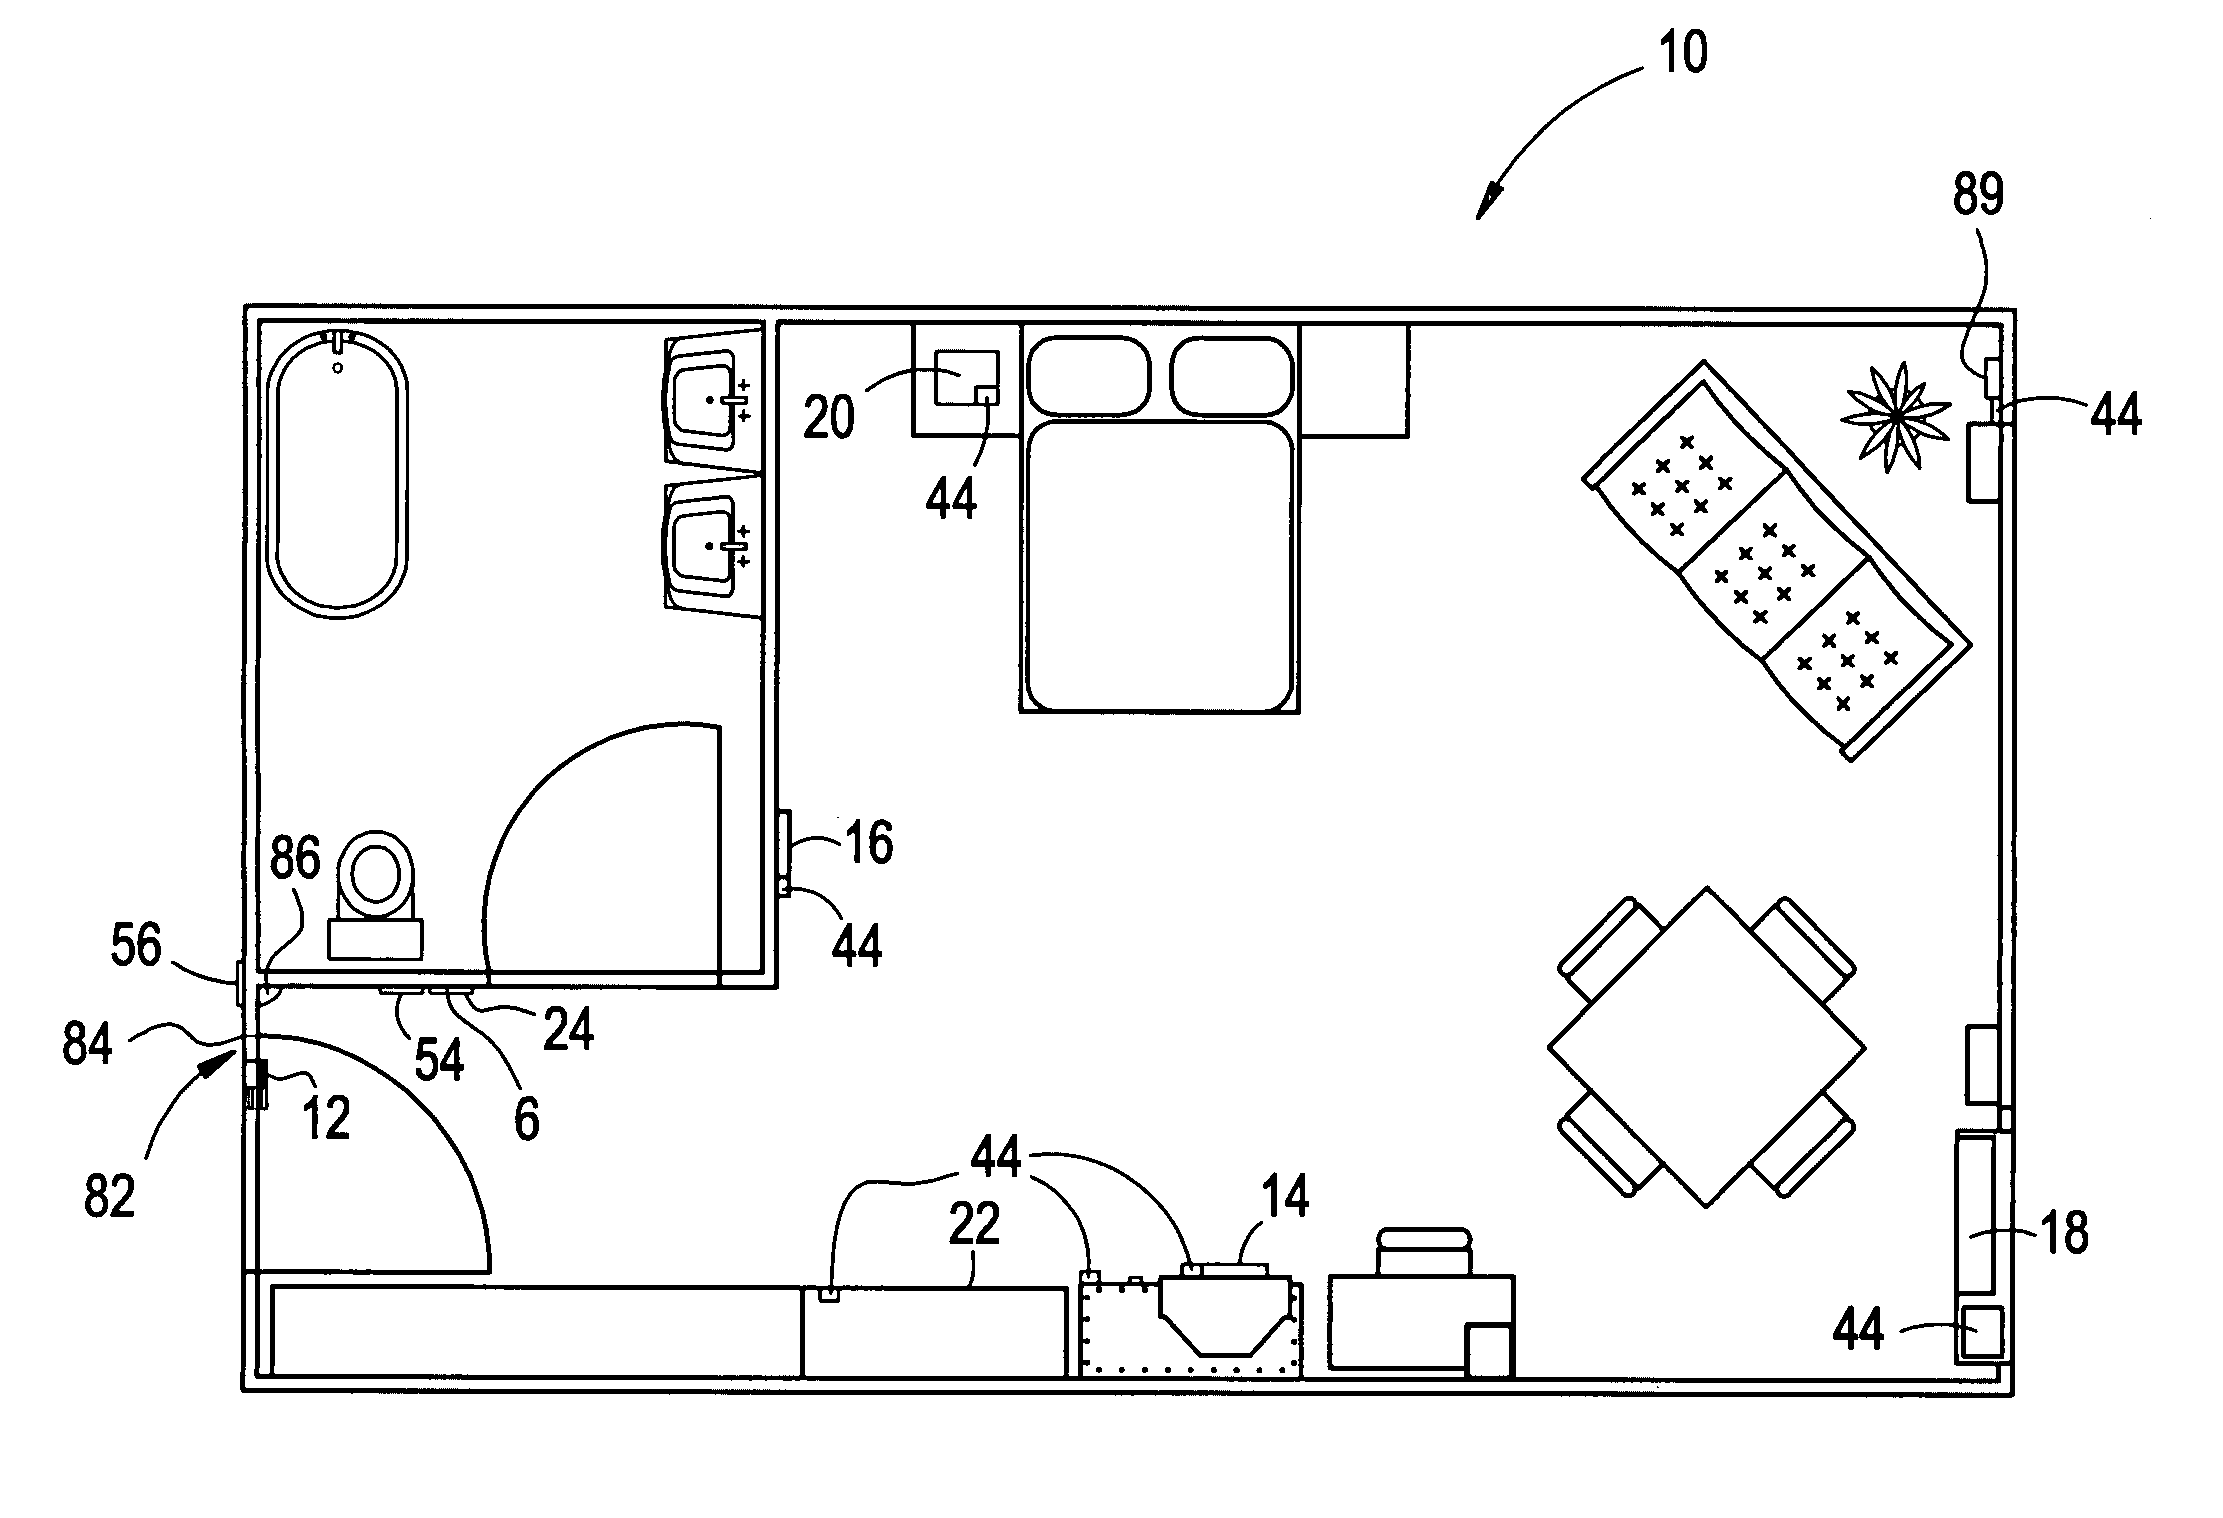 System and method for managing services and facilities in a multi-unit building